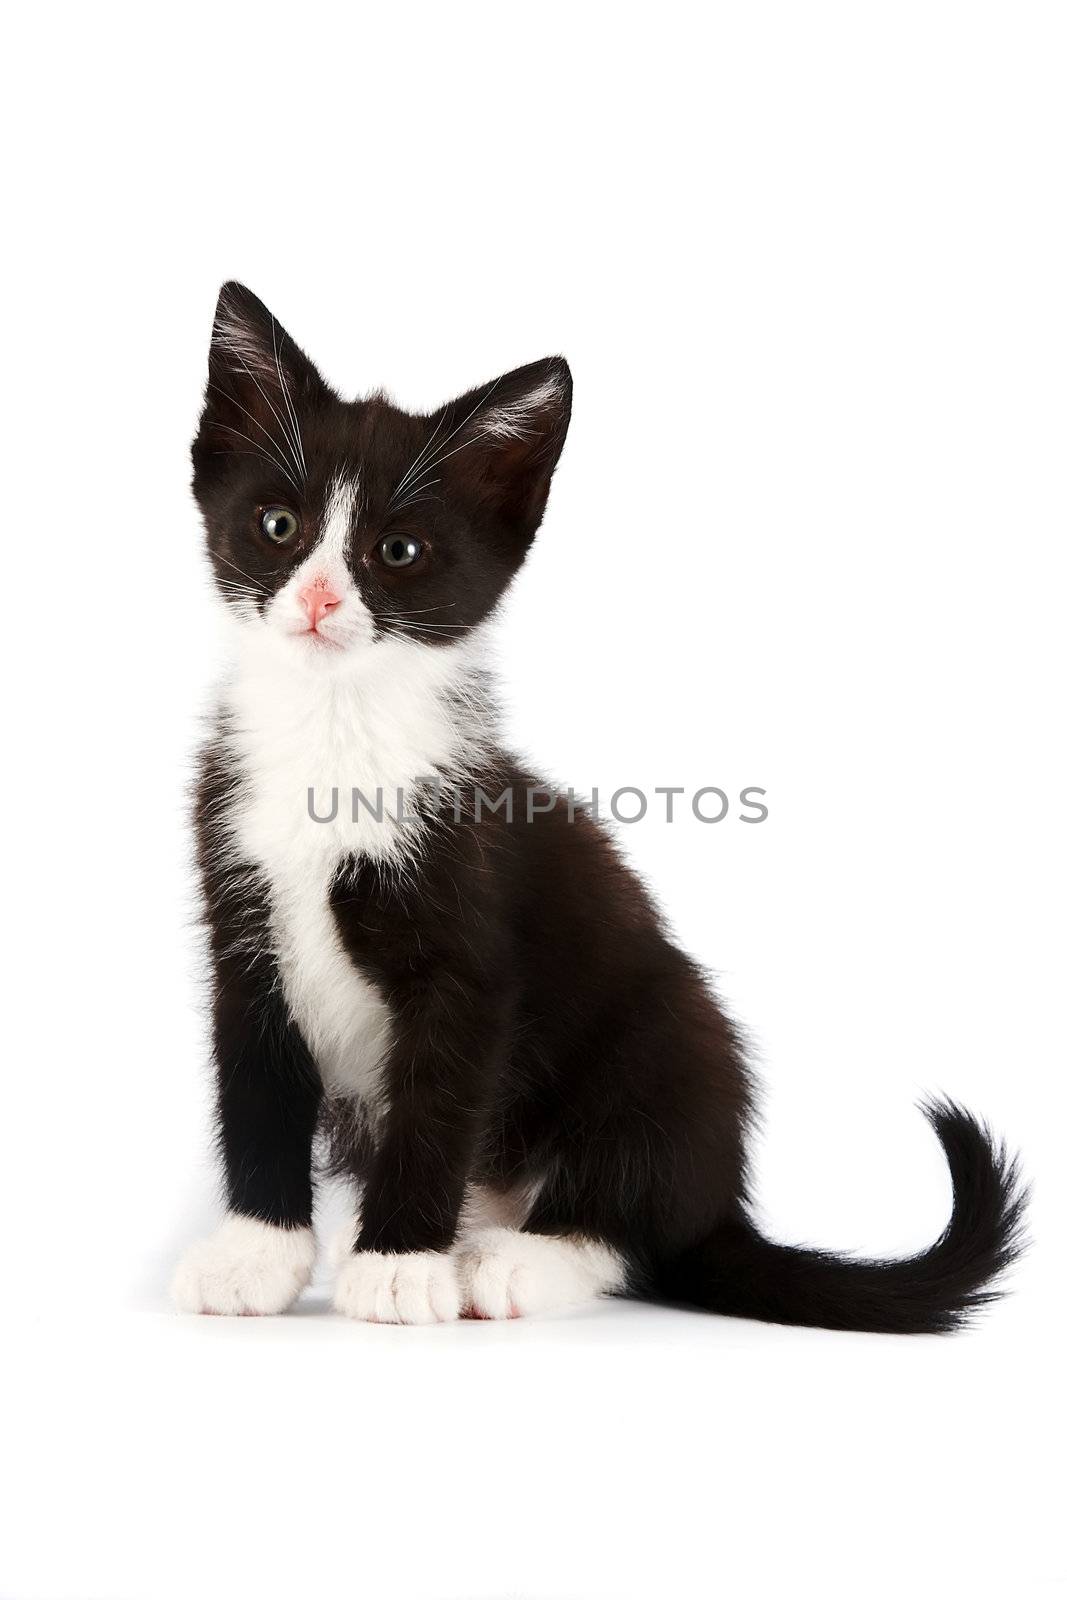 Black-and-white kitten on a white background